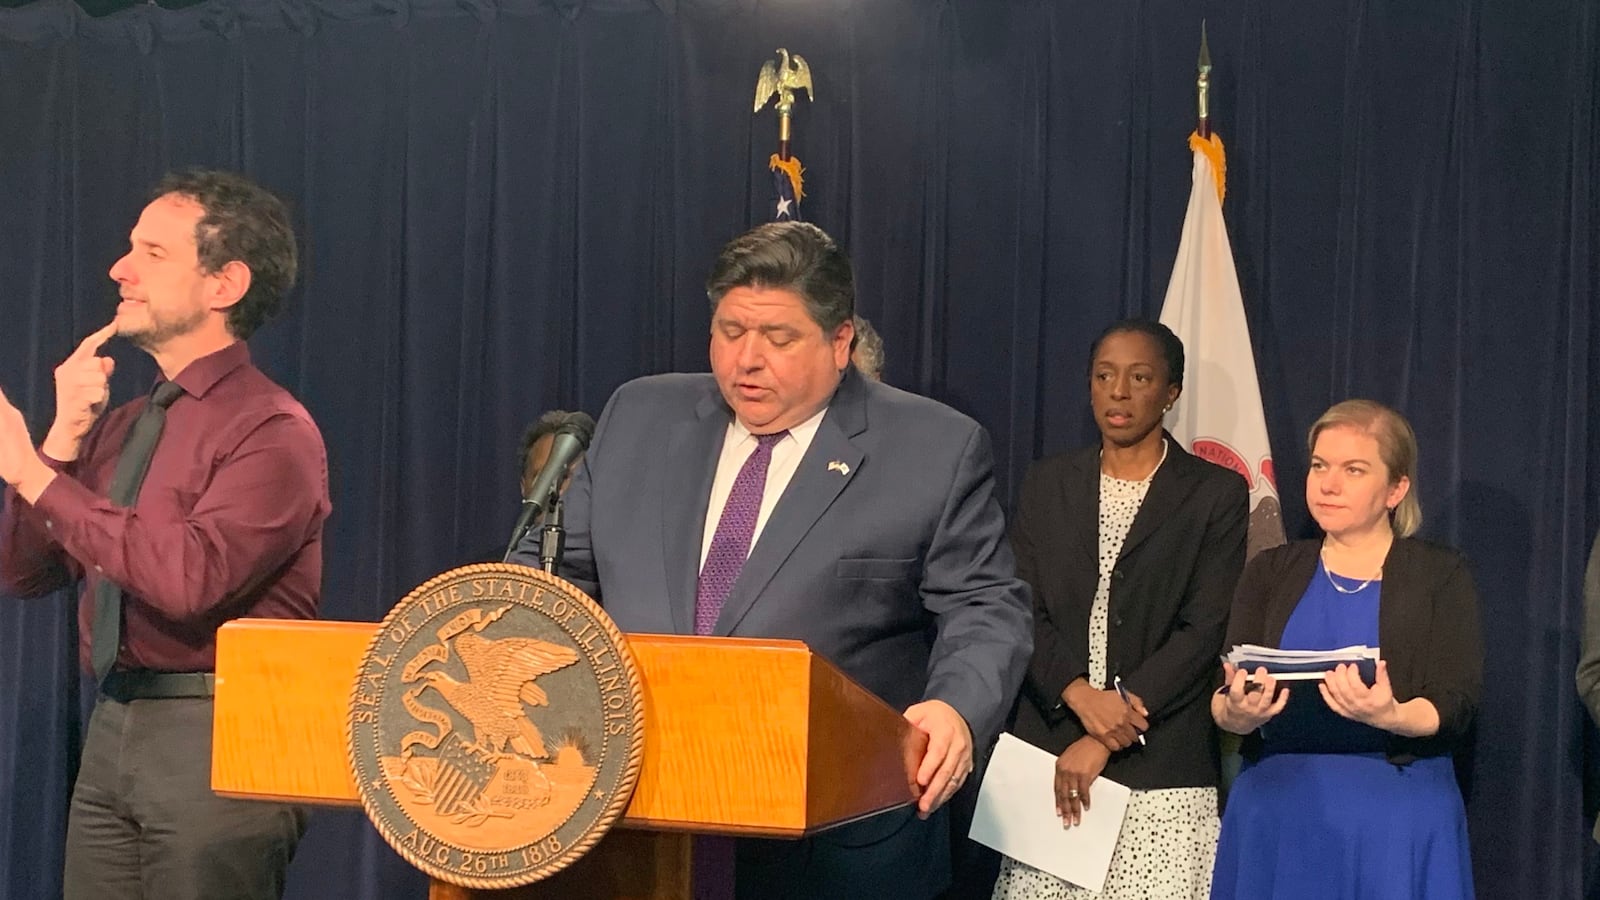 Illinois Gov. J.B. Pritzker talks Thursday about measures to counter the spread of the novel coronavirus. He is flanked on the left by an interpreter and on the right by Illinois public health Director Ngozi Ezike and Chicago public health Commissioner Allison Arwady.